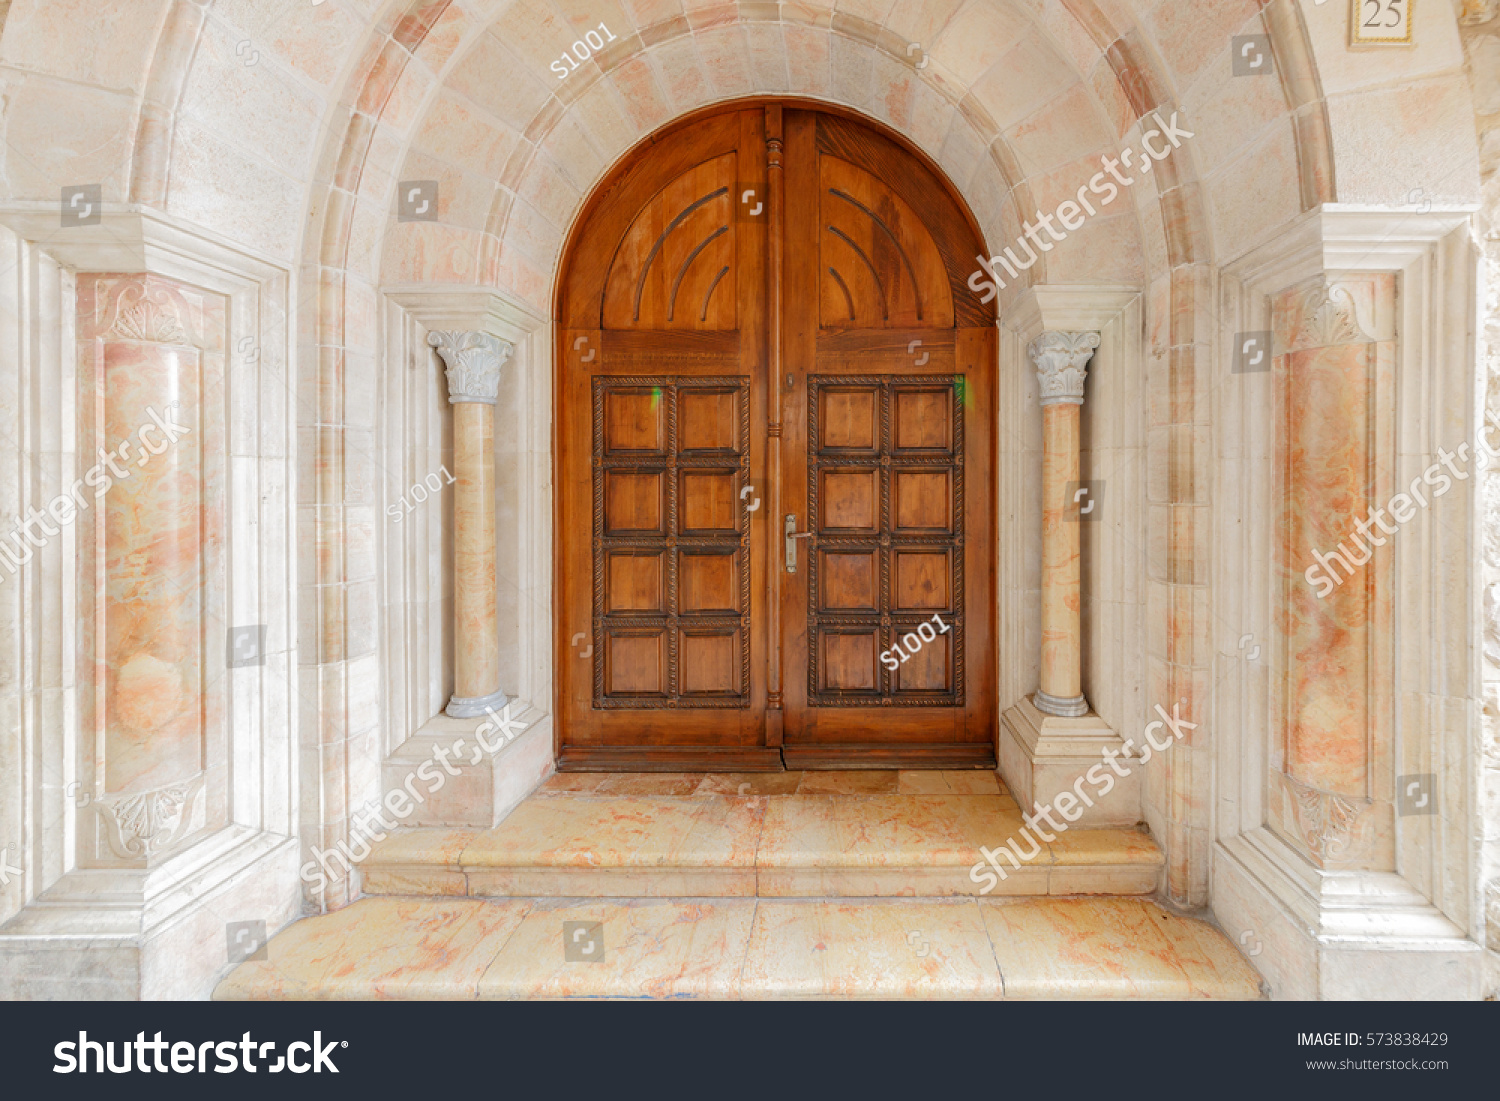 Wooden Arched Double Doors Stock Photo Edit Now 573838429